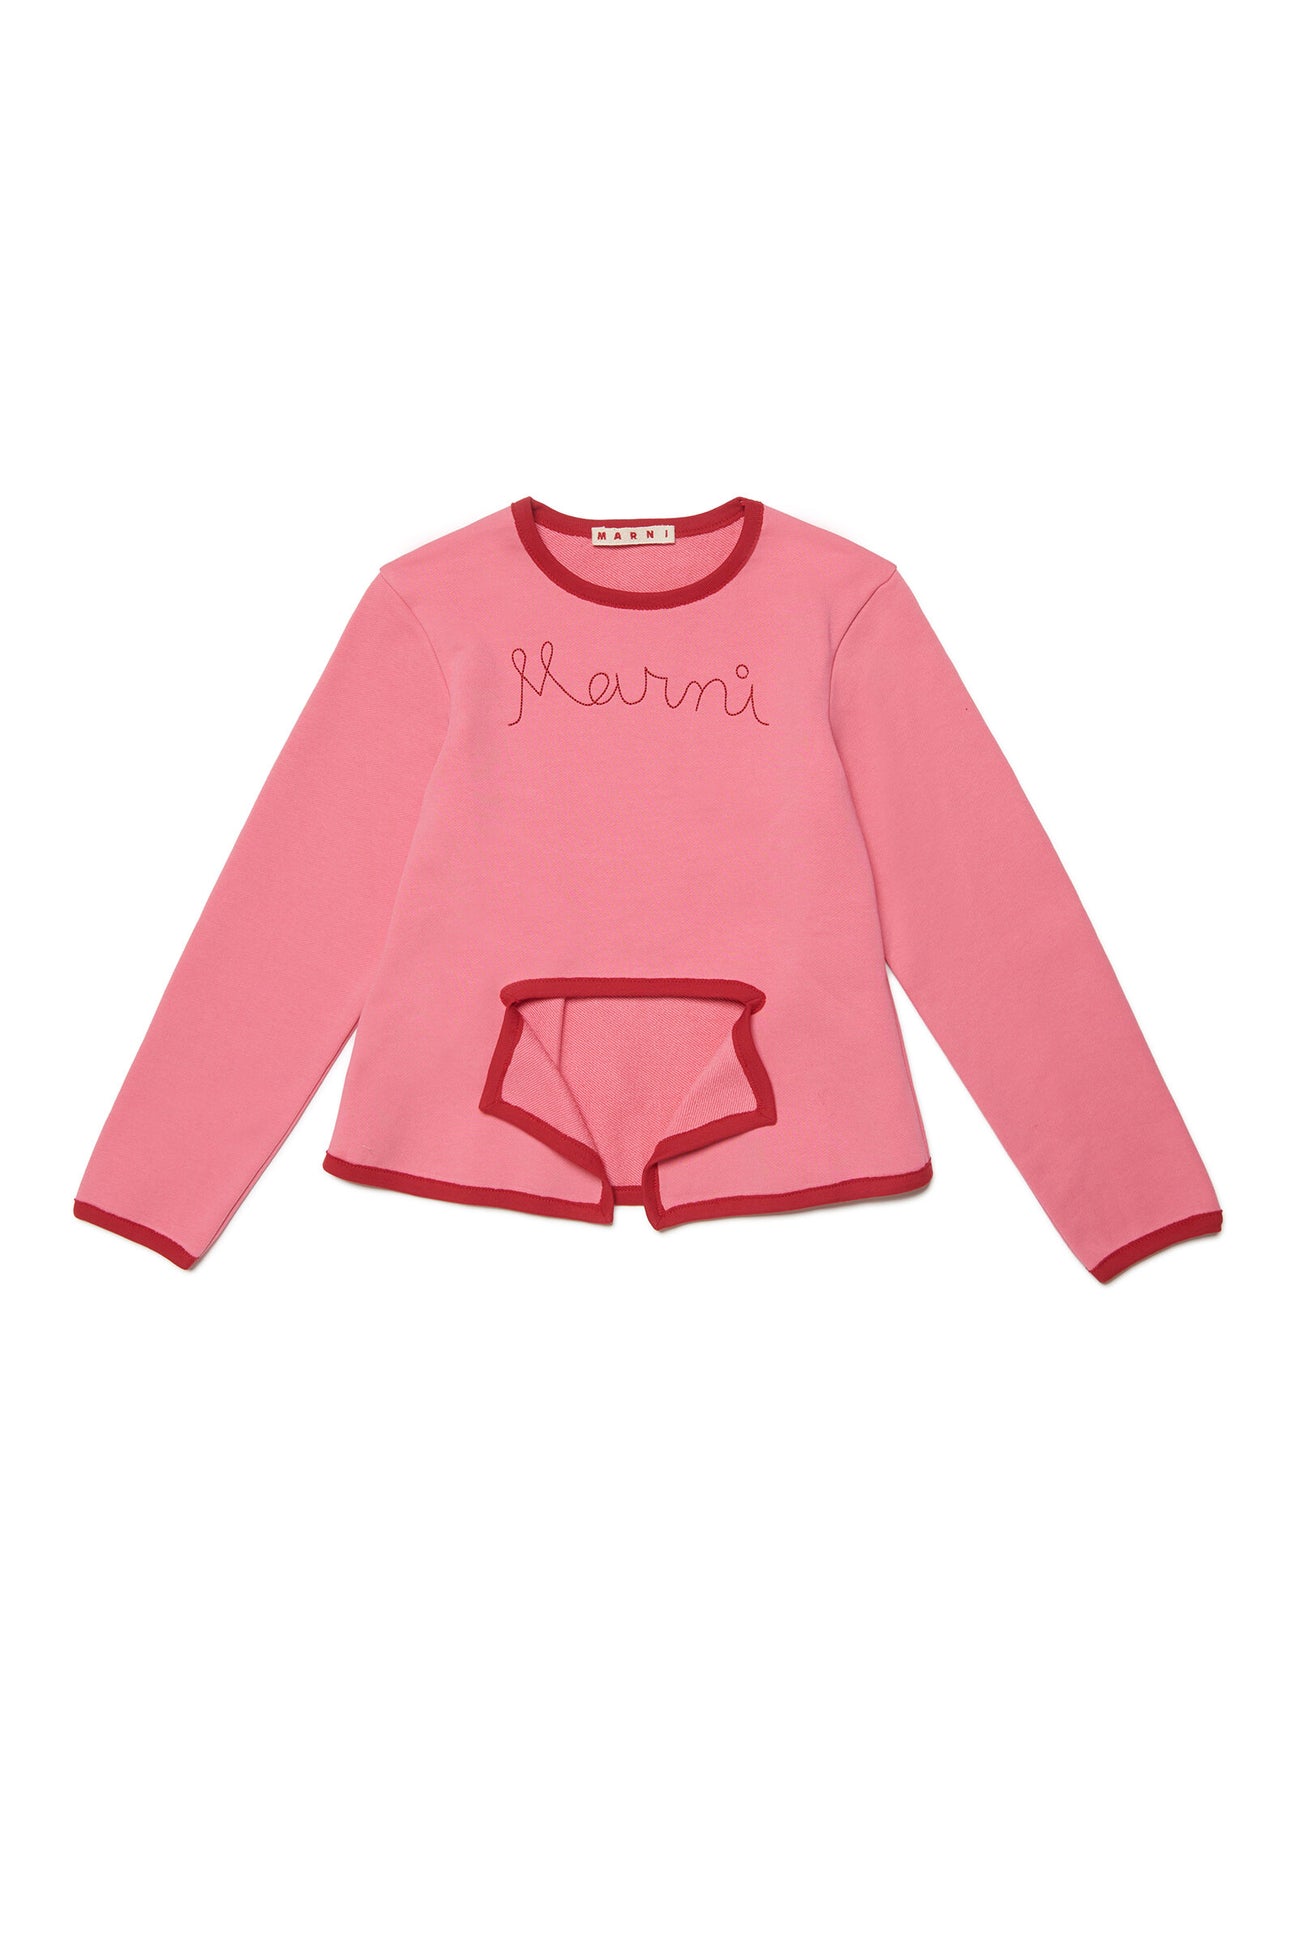 Marni Clothing Outlet for Babies, Kids and Teens